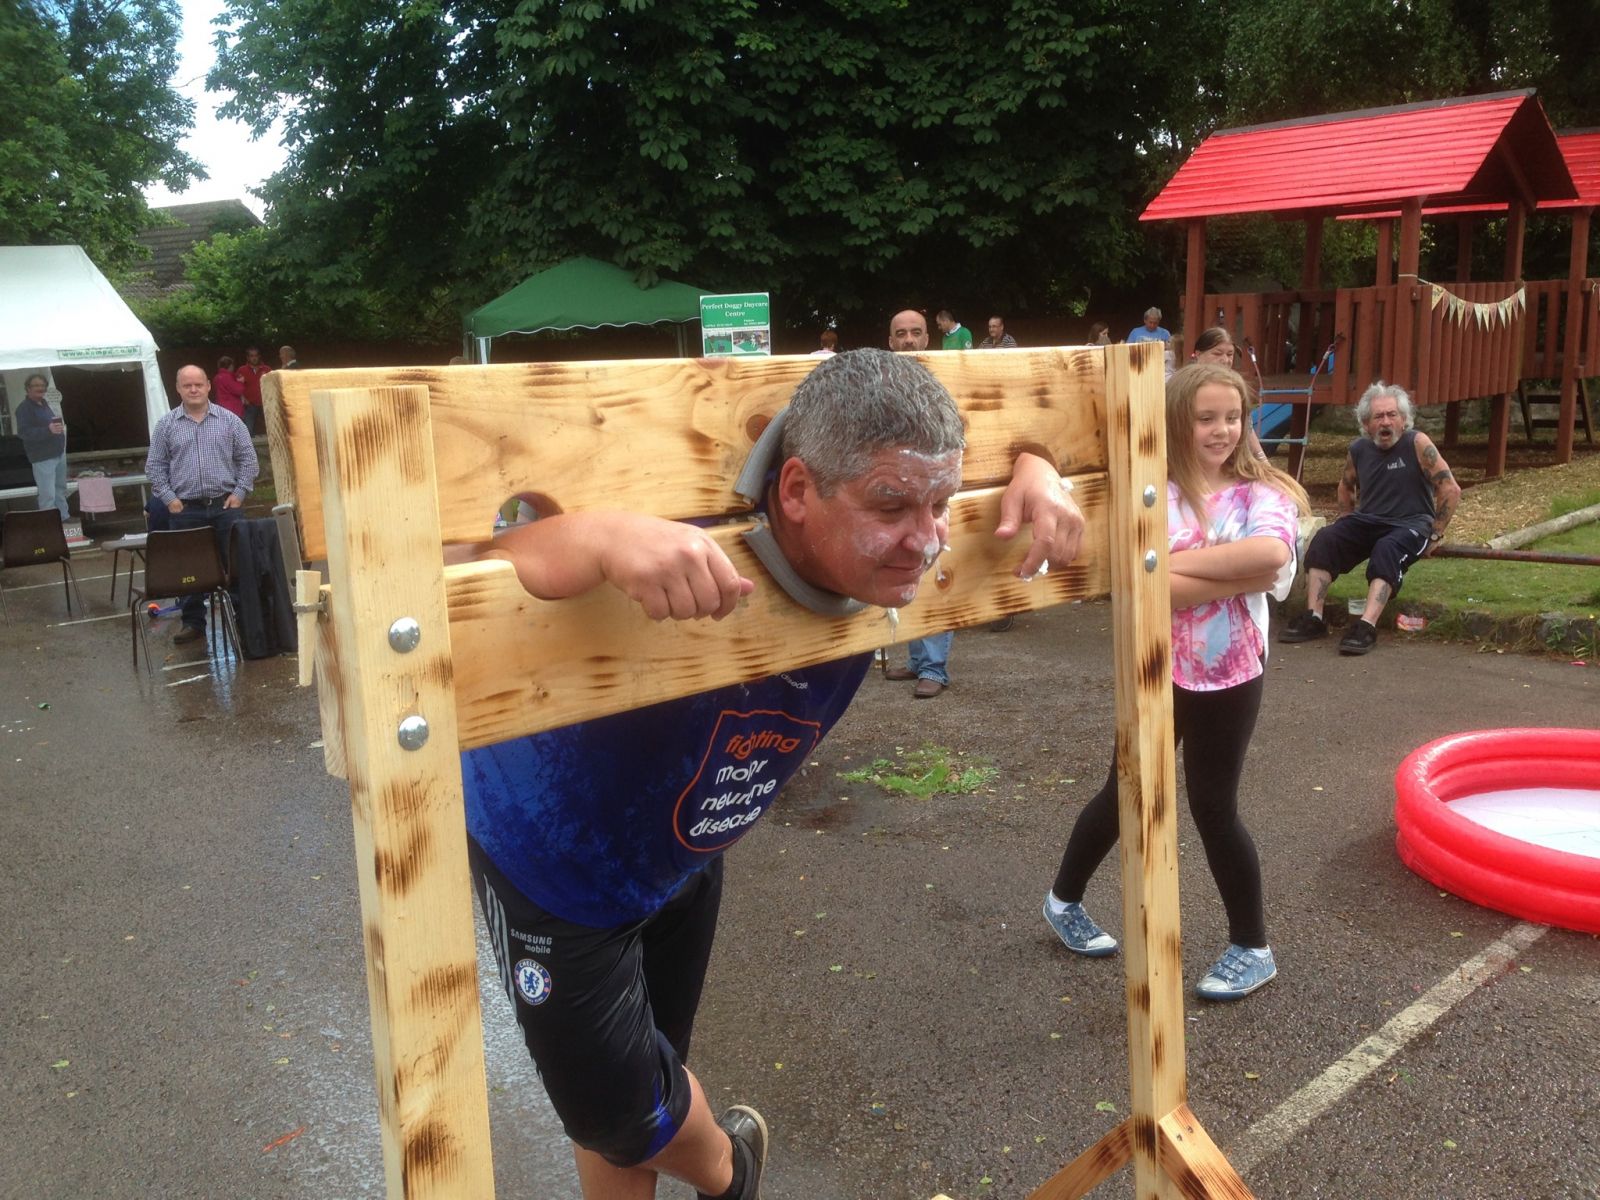 The stocks at The Castle Inn Family fun day